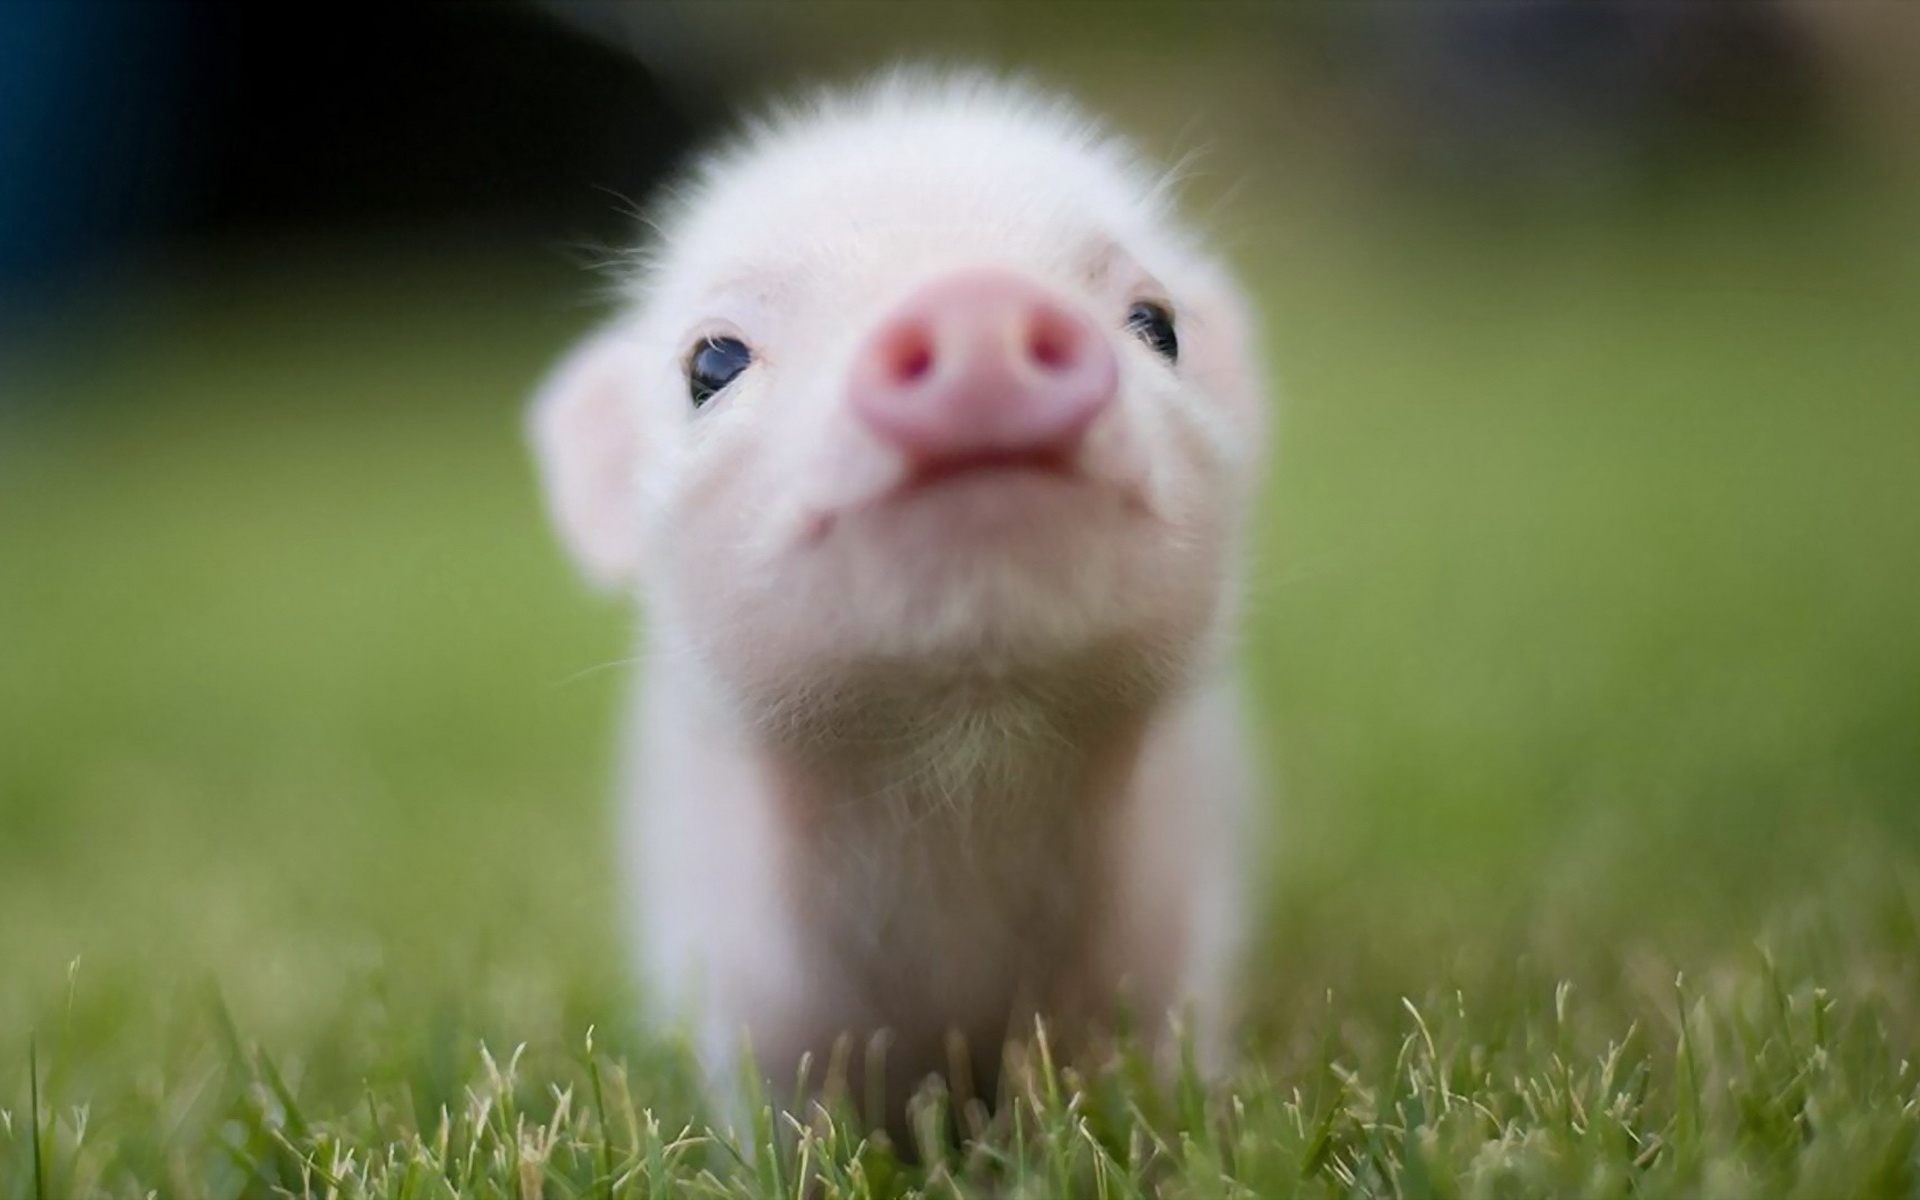 Little pig wallpapers and images - wallpapers, pictures, photos